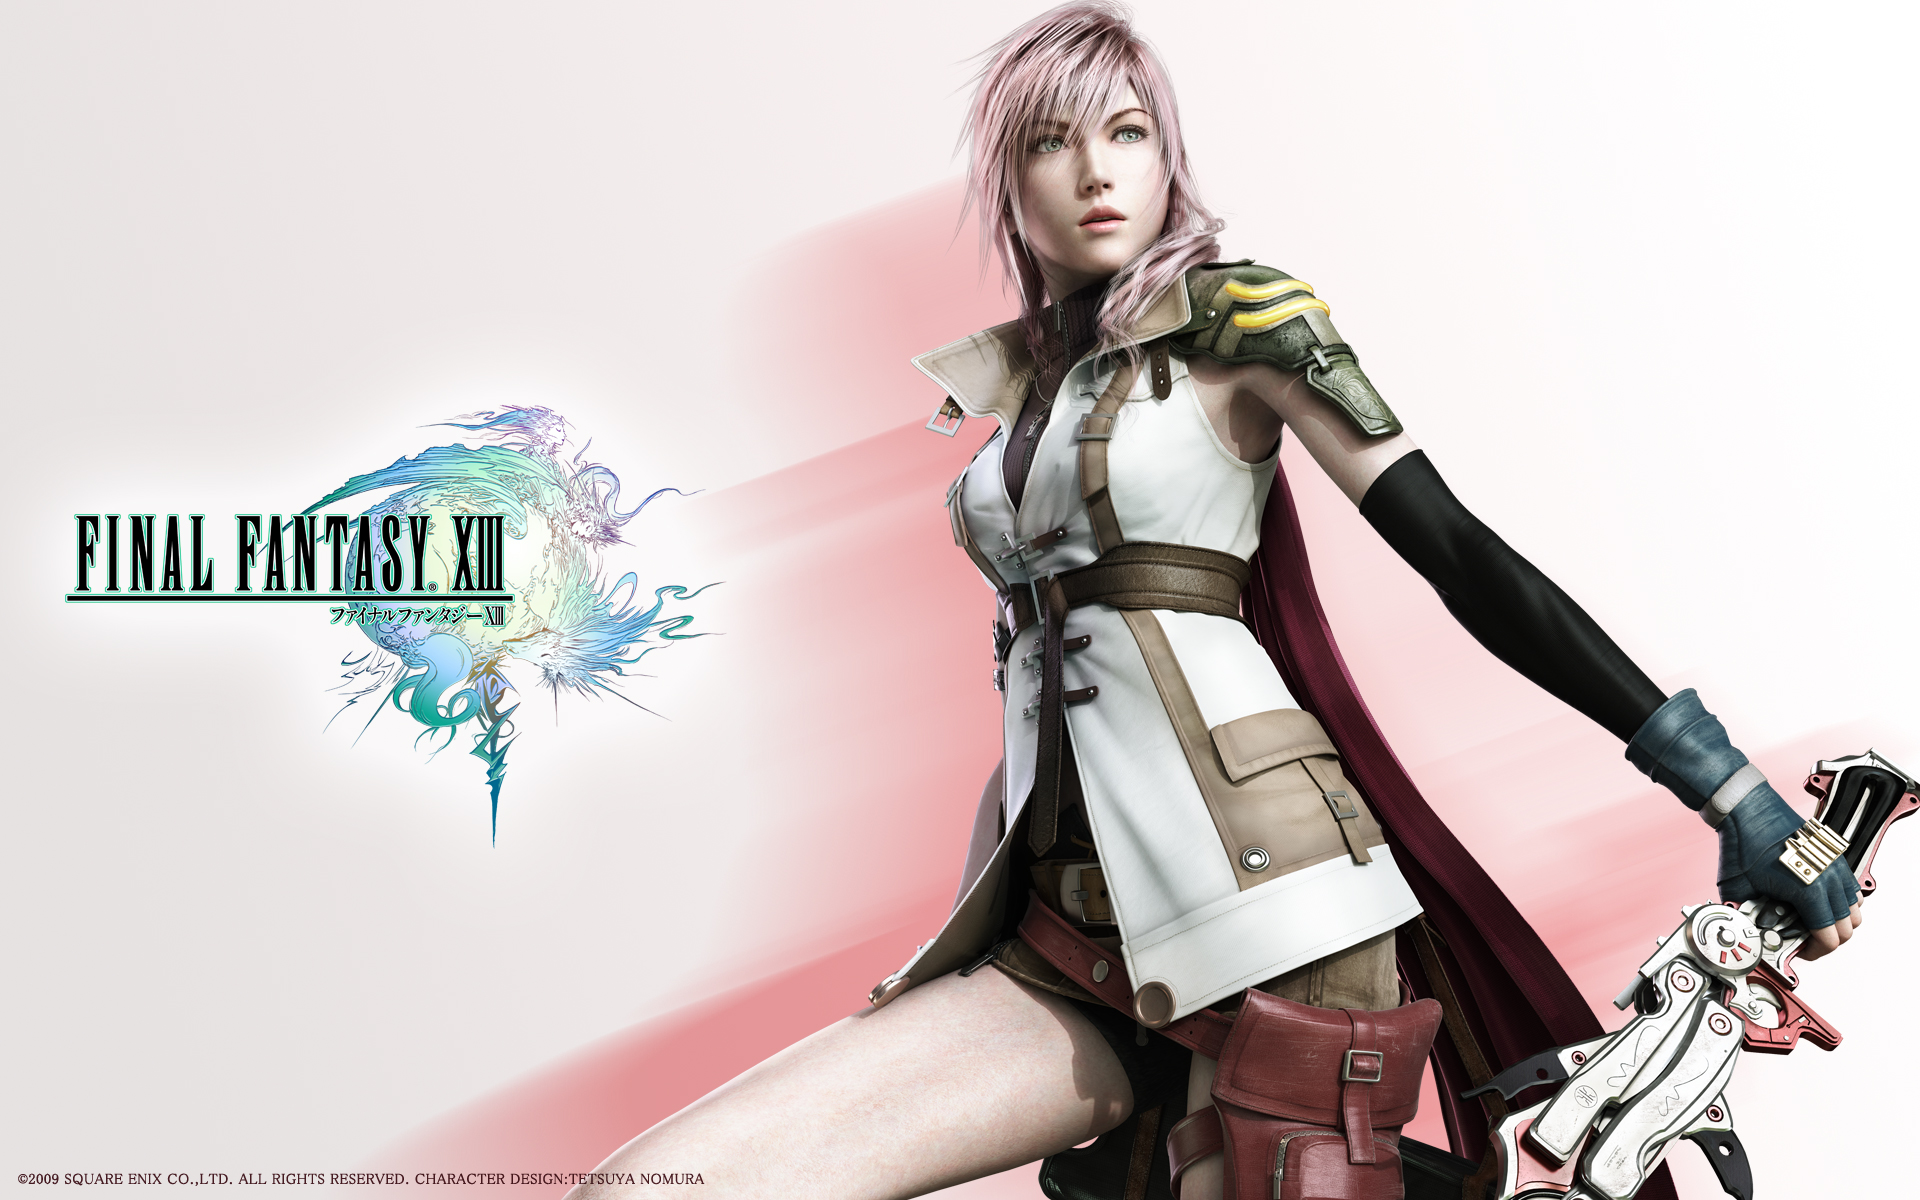 Free Download Final Fantasy Xiii Ffxiii Ff13 Wallpapers 19x10 For Your Desktop Mobile Tablet Explore 49 Ff13 Wallpaper Ff7 Wallpaper Lightning Ff13 Wallpaper 13 Wallpaper